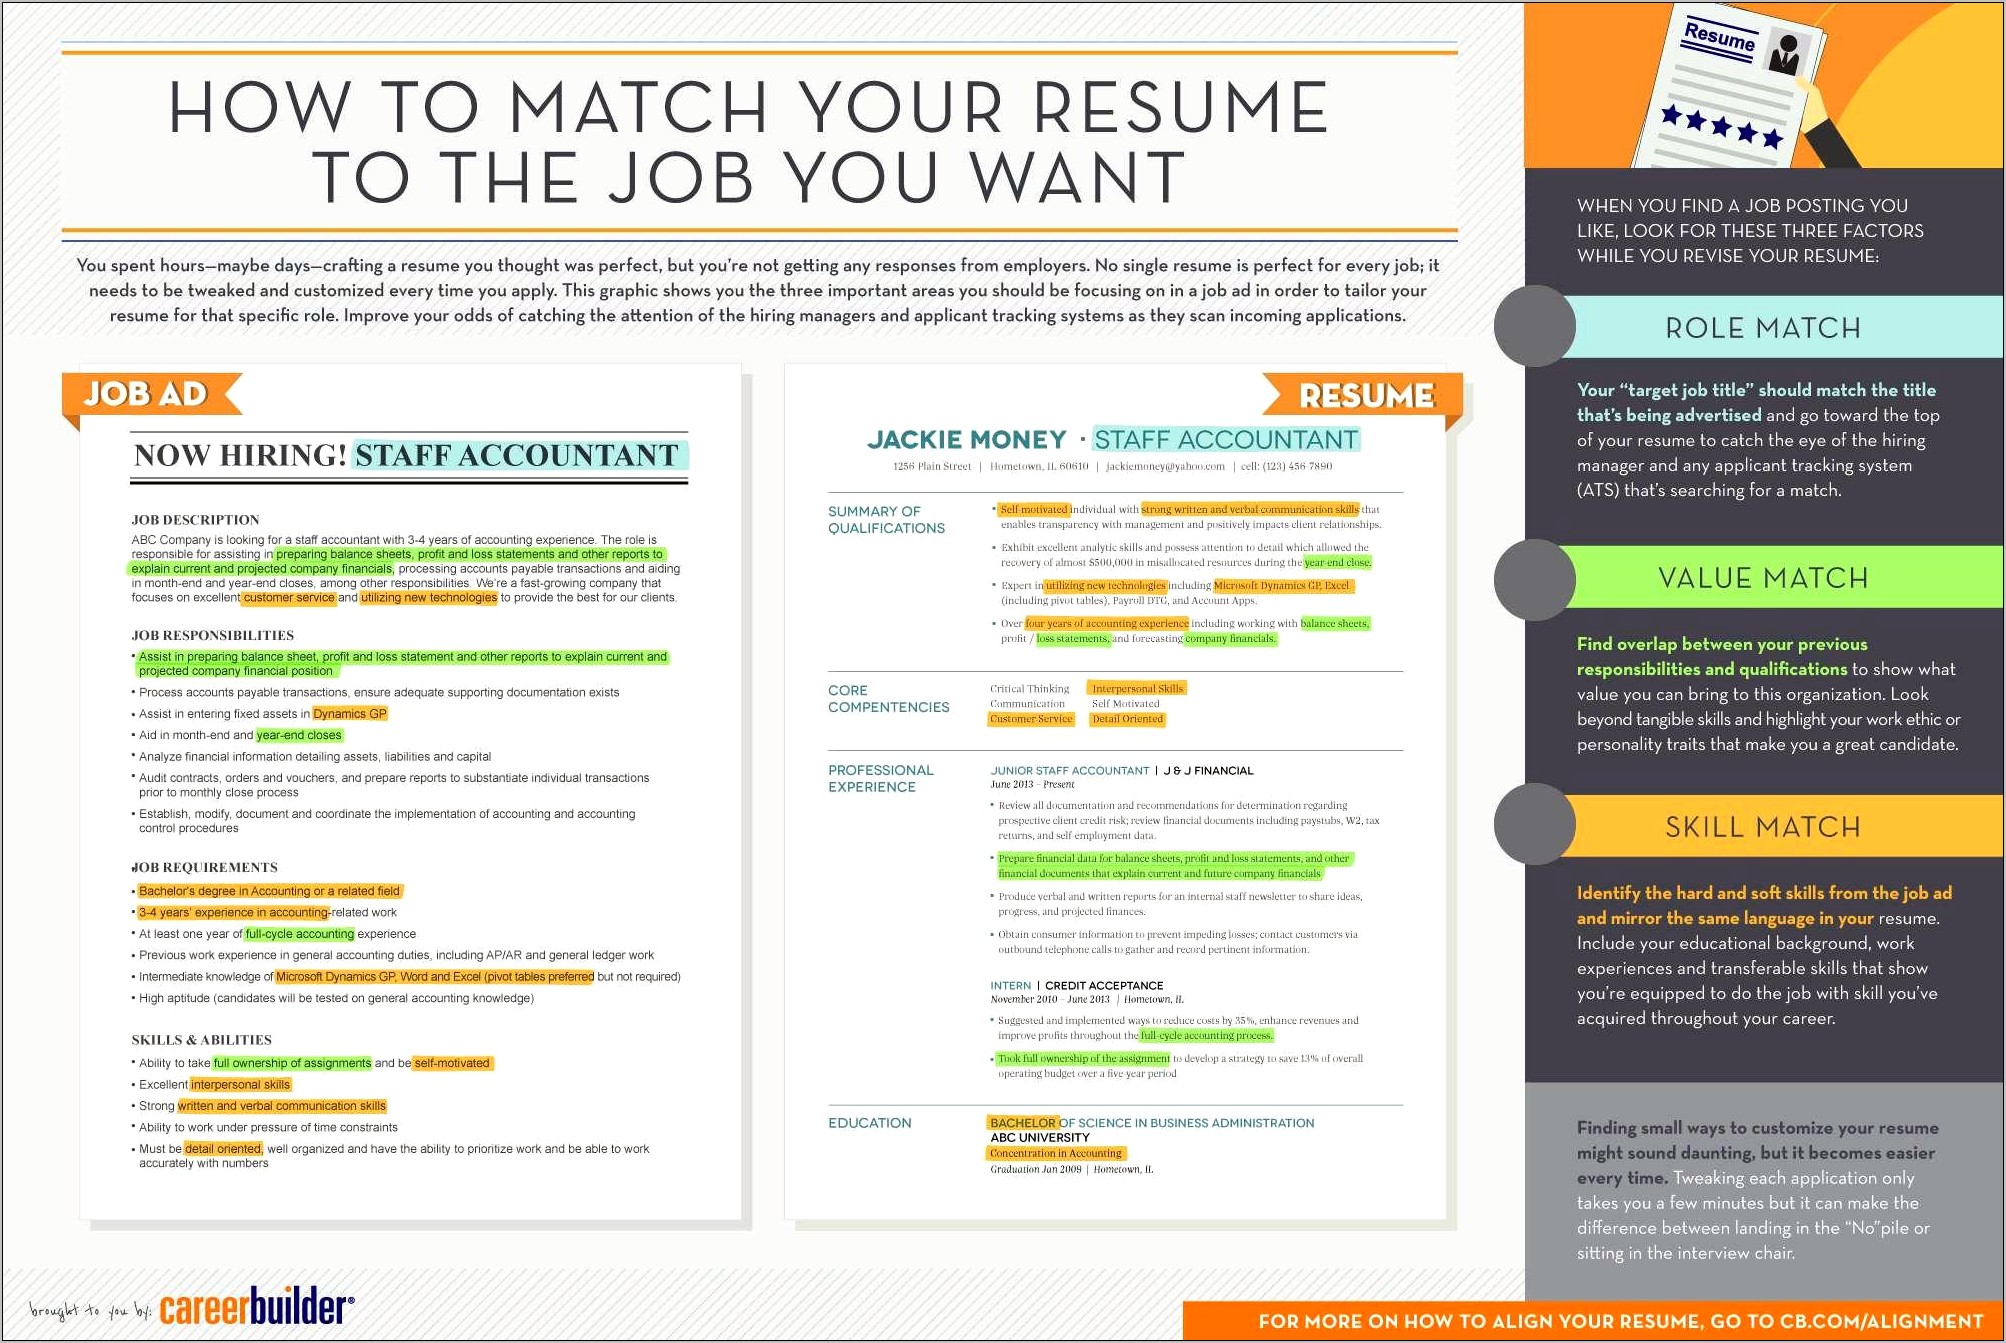 Post Your Resume And Get A Job